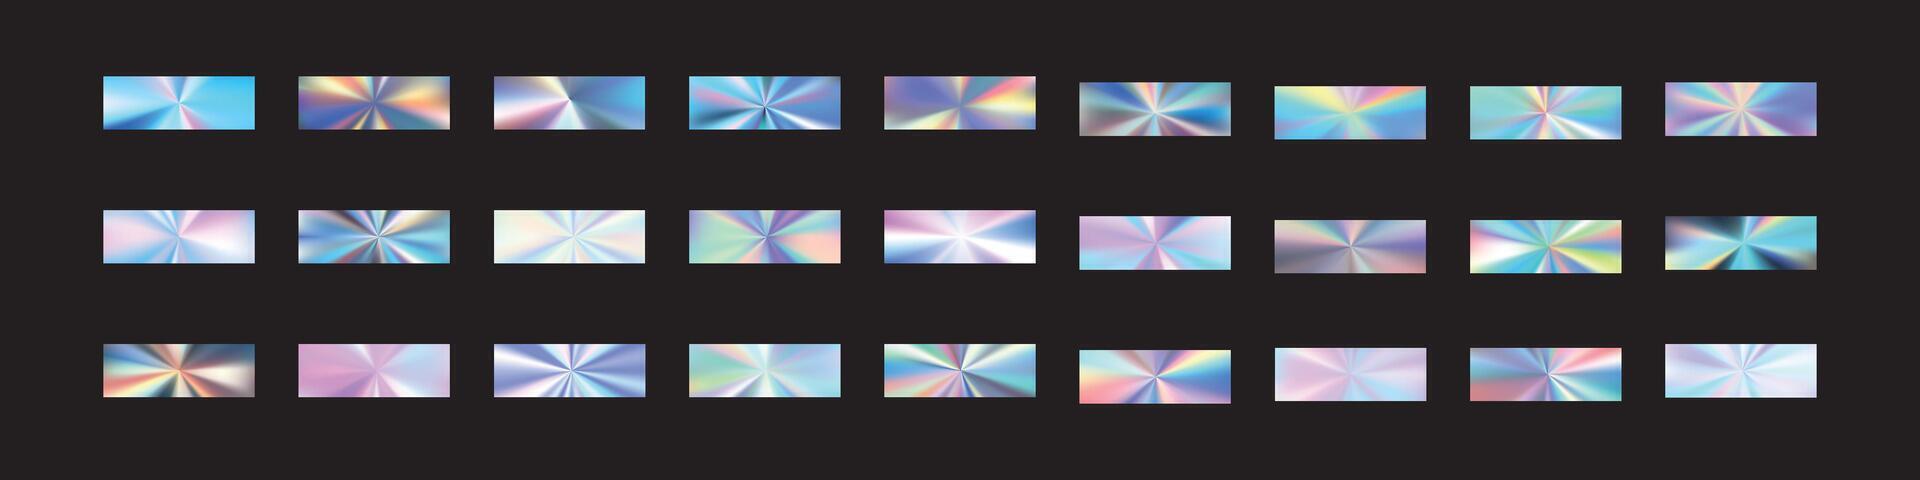 Foil gradient with silver, gold, and pink hues in holographic. Flat vector illustration isolated on white background.